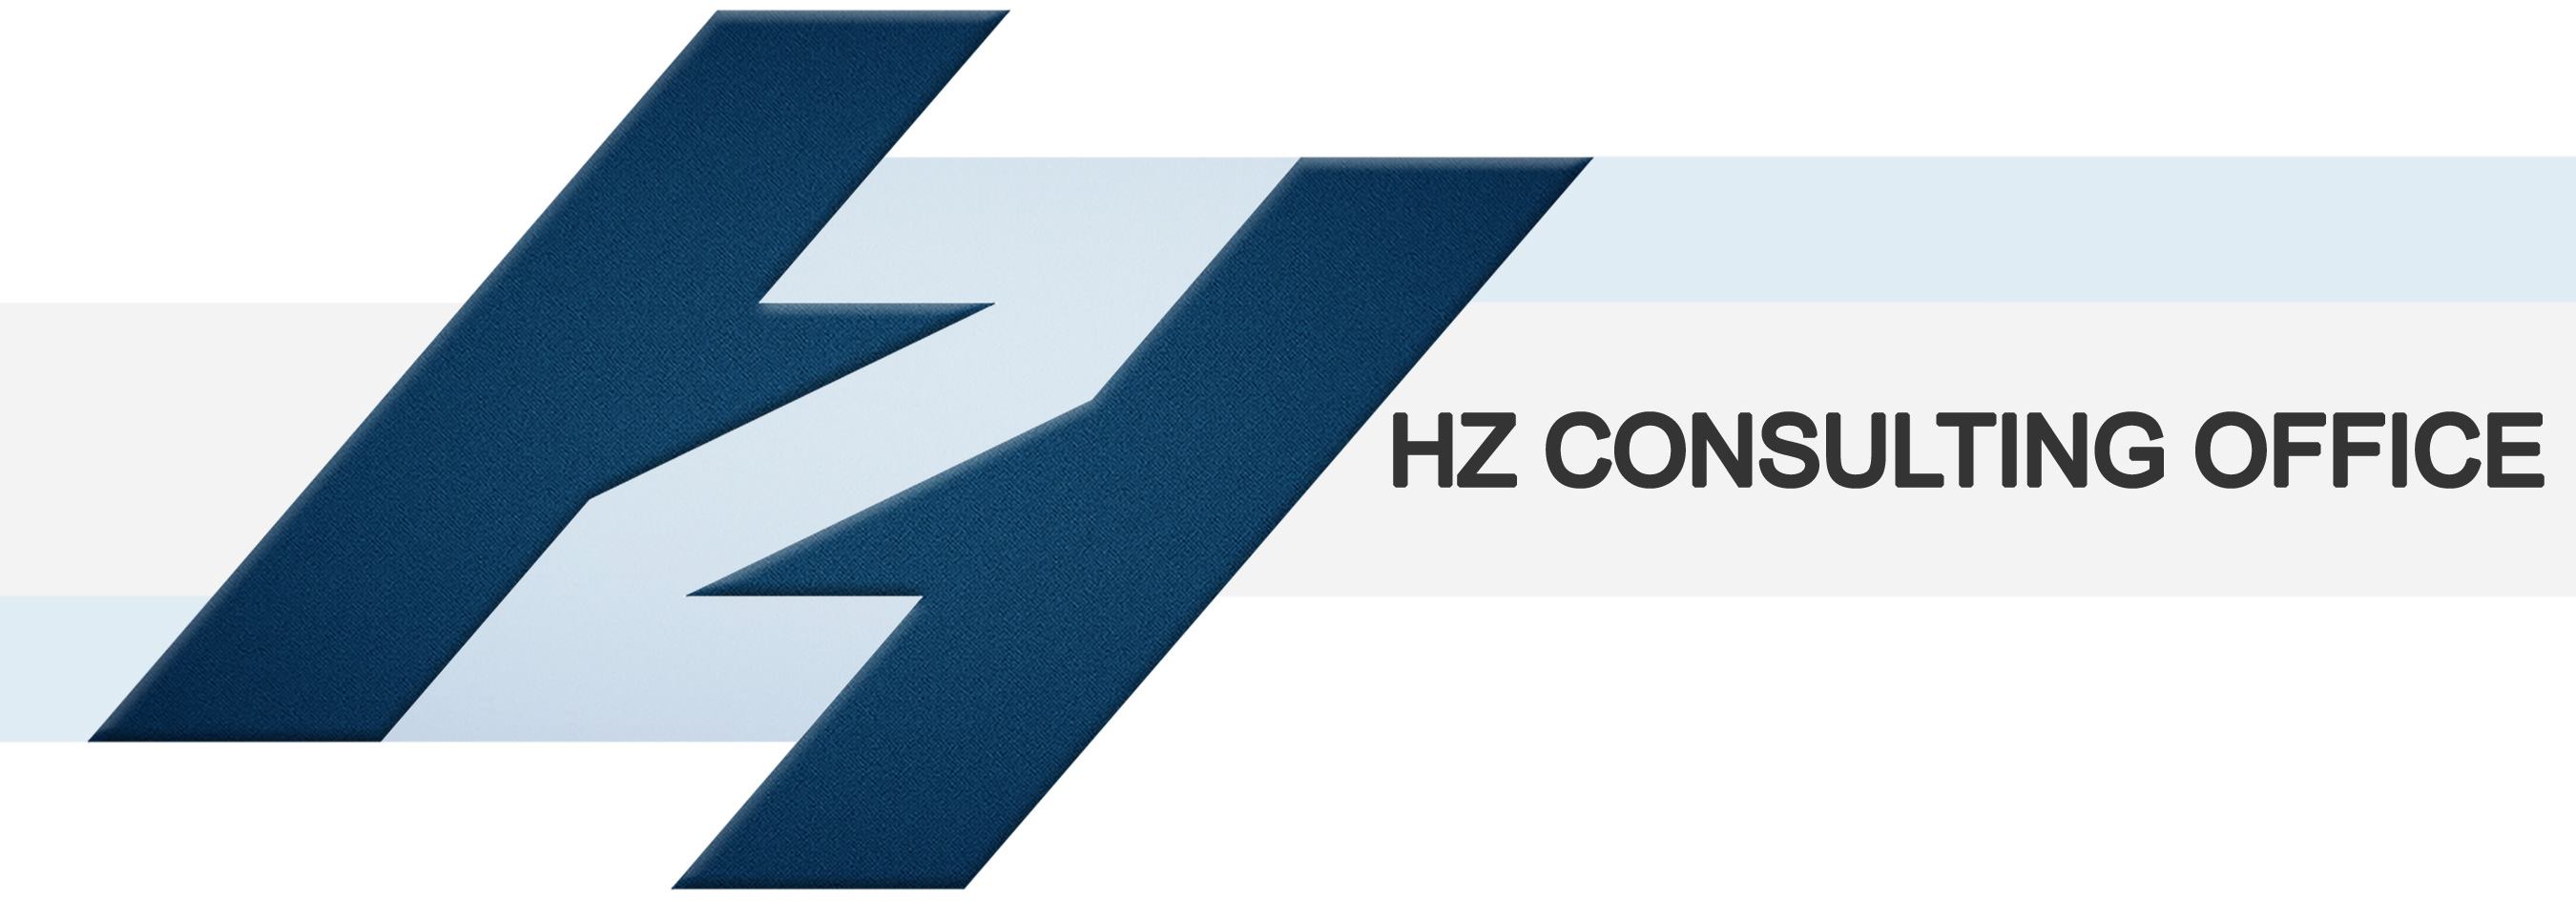 HZ Consulting Group